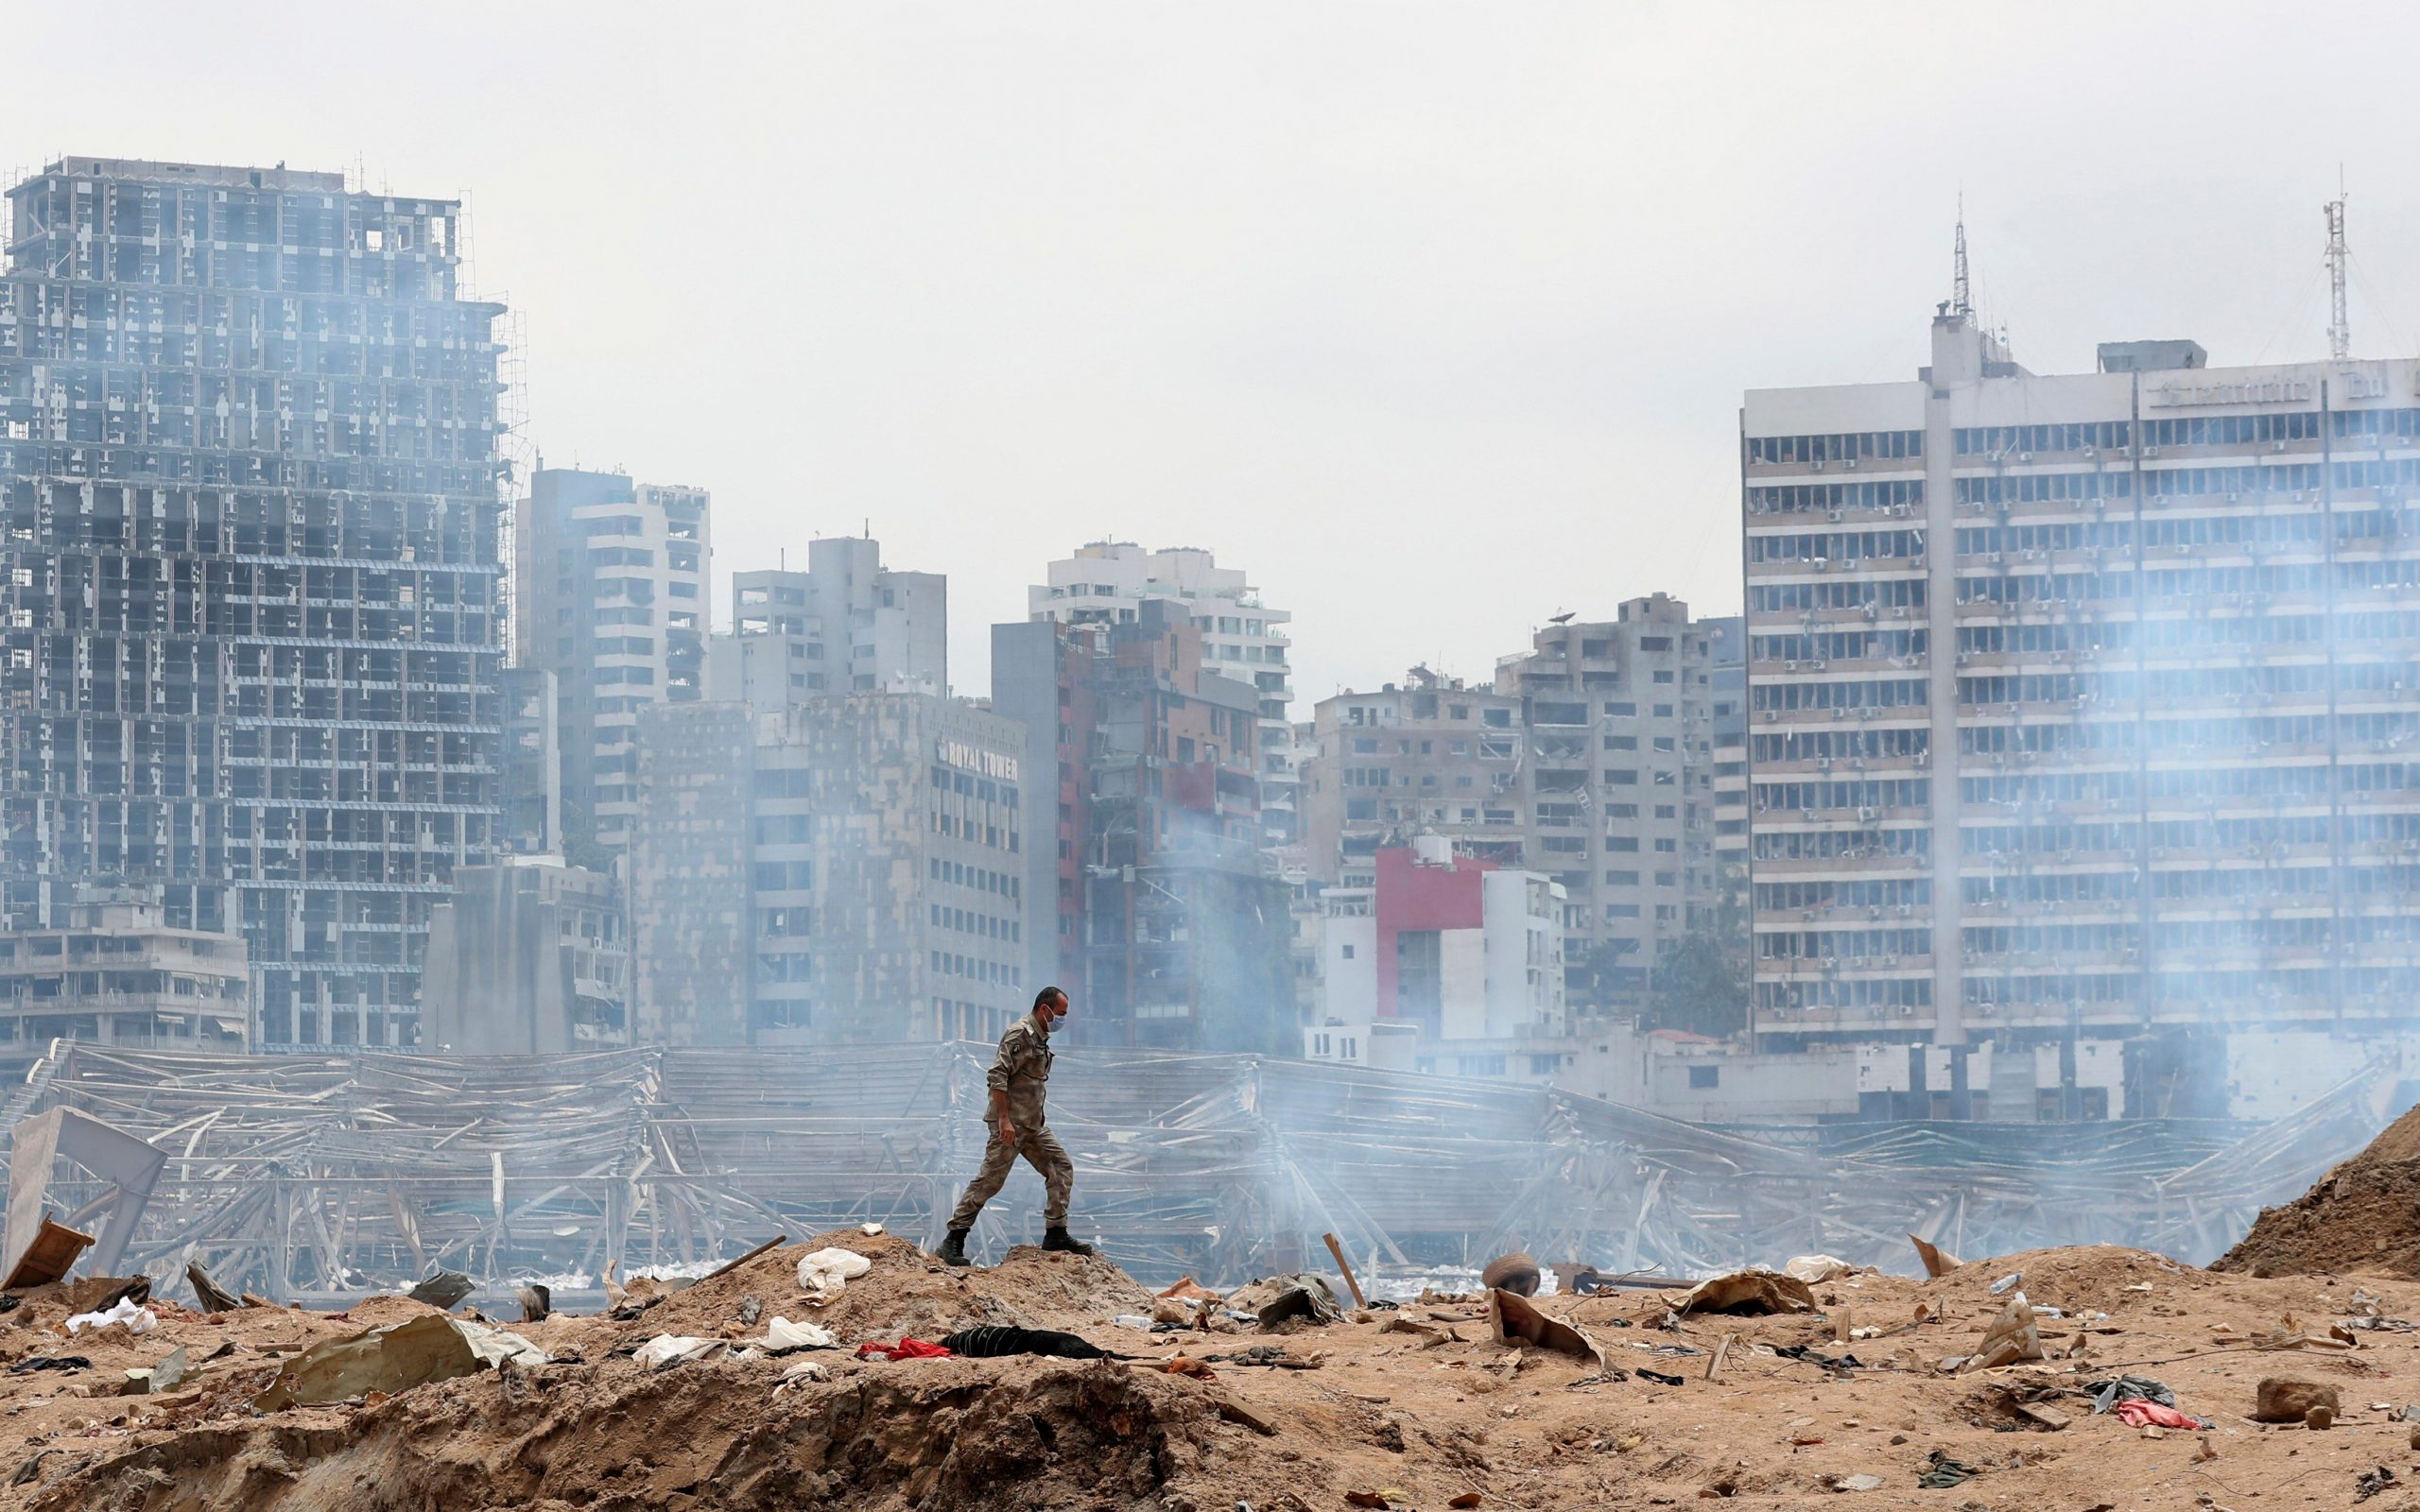 Beirut explosion: Political game changer for Lebanon or hollow blow?